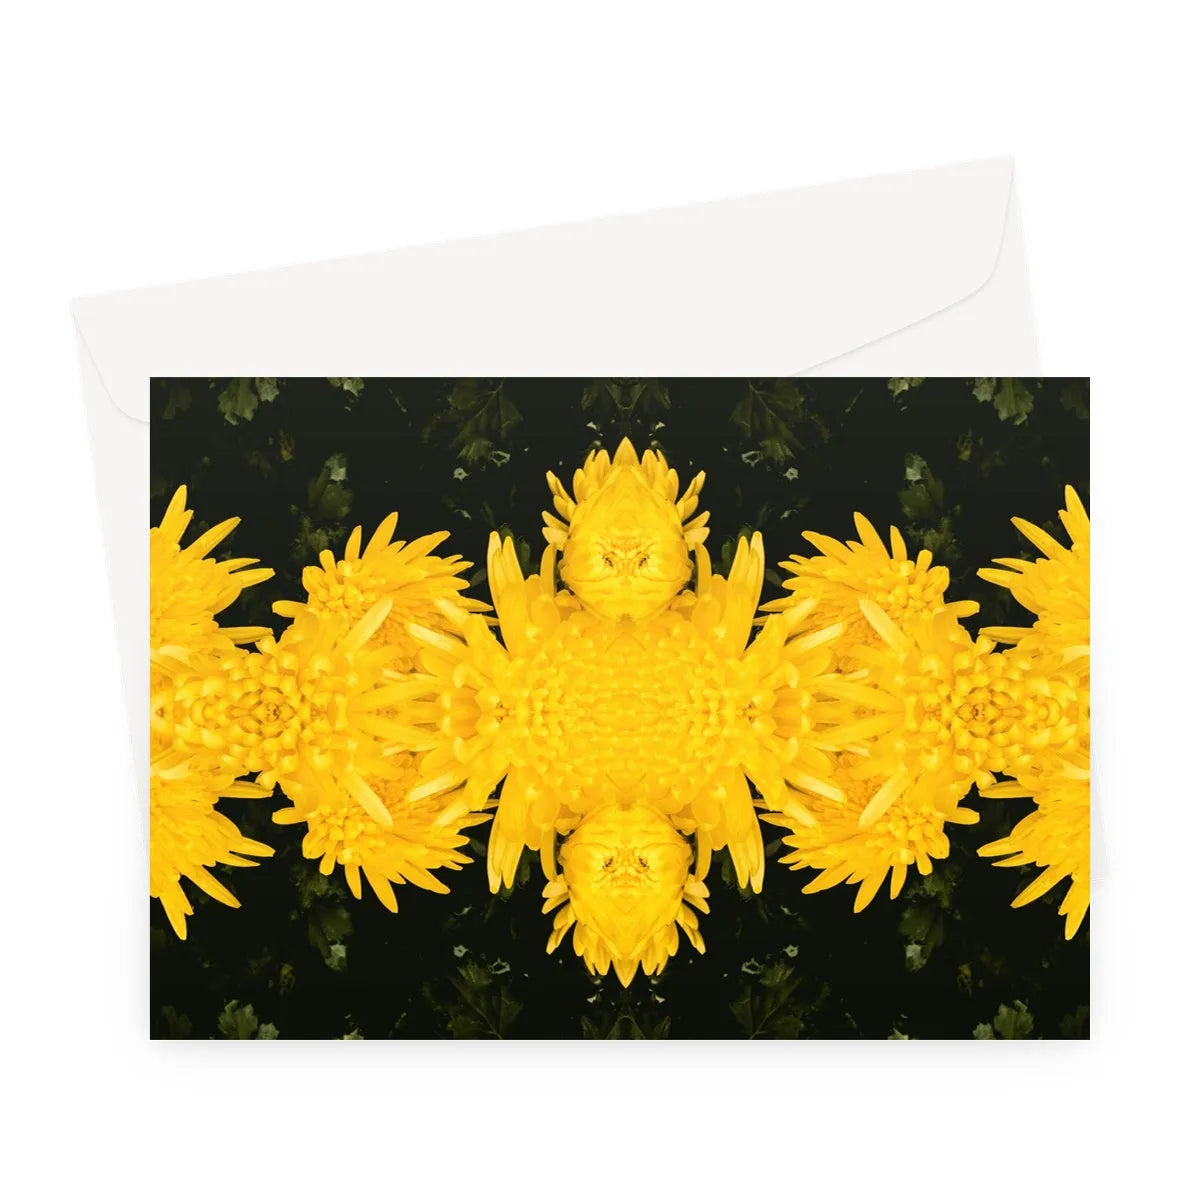 Tweedledum Greeting Card - A5 Landscape / 10 Cards - Greeting & Note Cards - Aesthetic Art